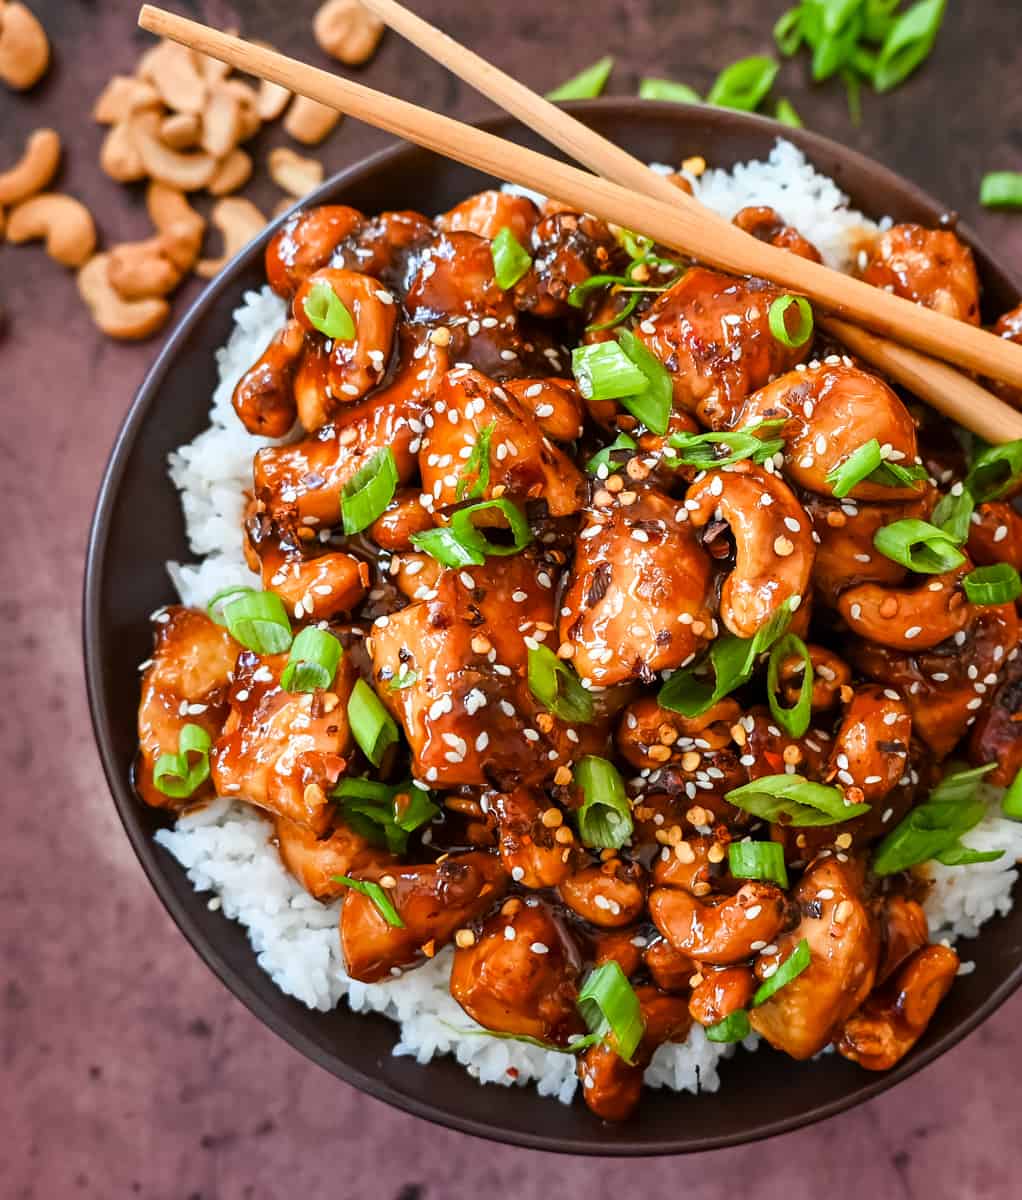 How to make Better than Take Out Cashew Chicken at home. This quick and easy cashew chicken is made with chicken, crunchy cashews, in a velvety homemade stir fry sauce.